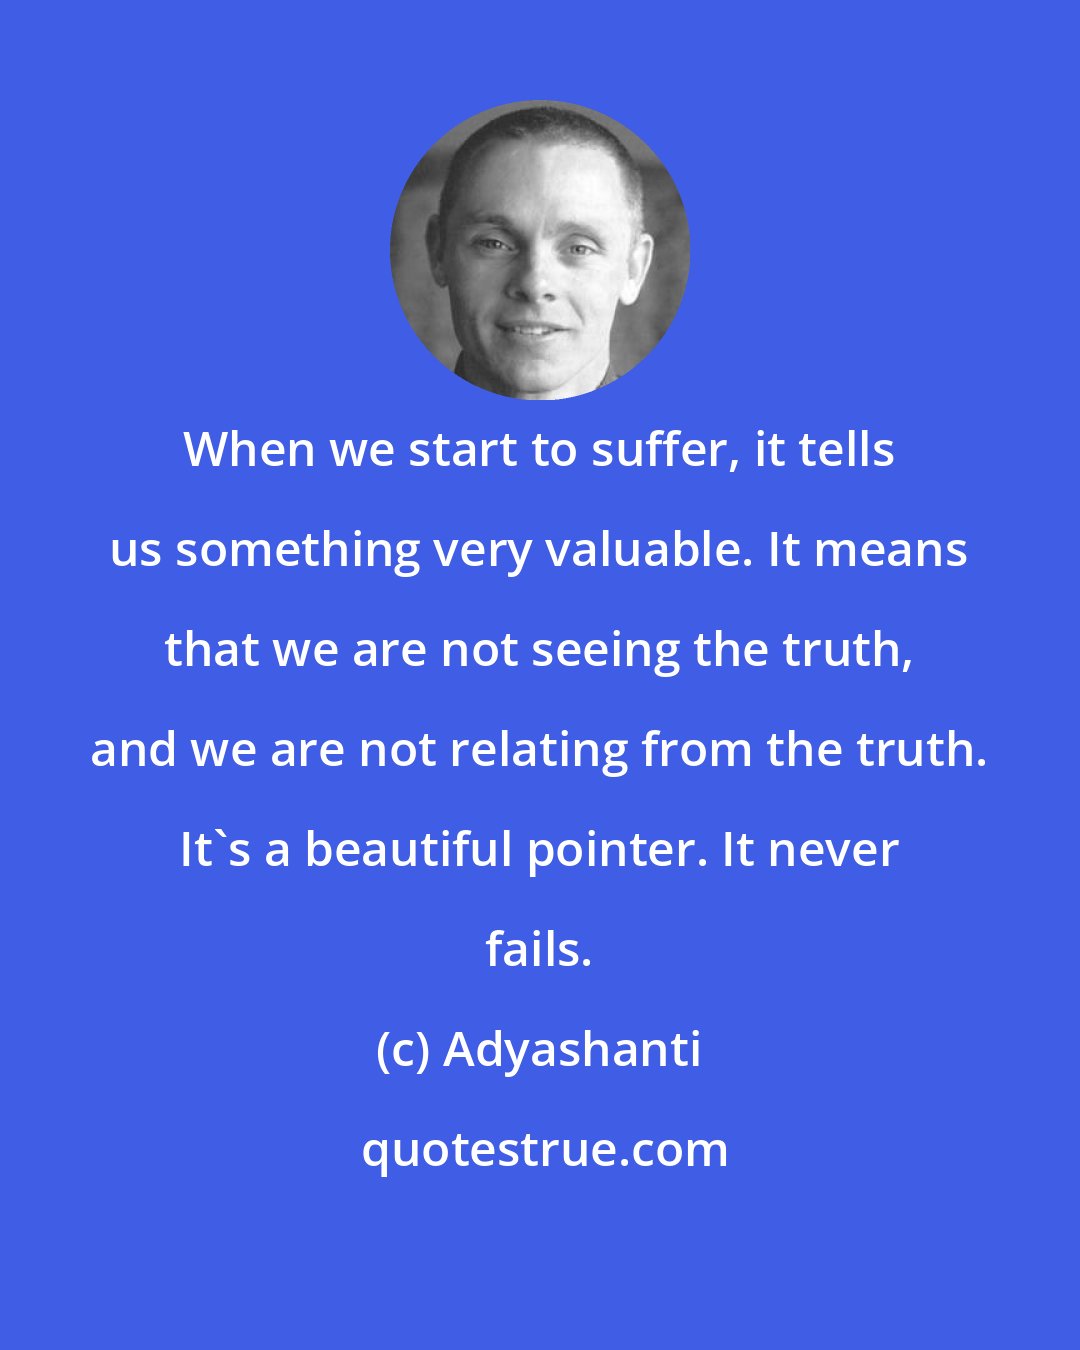 Adyashanti: When we start to suffer, it tells us something very valuable. It means that we are not seeing the truth, and we are not relating from the truth. It's a beautiful pointer. It never fails.